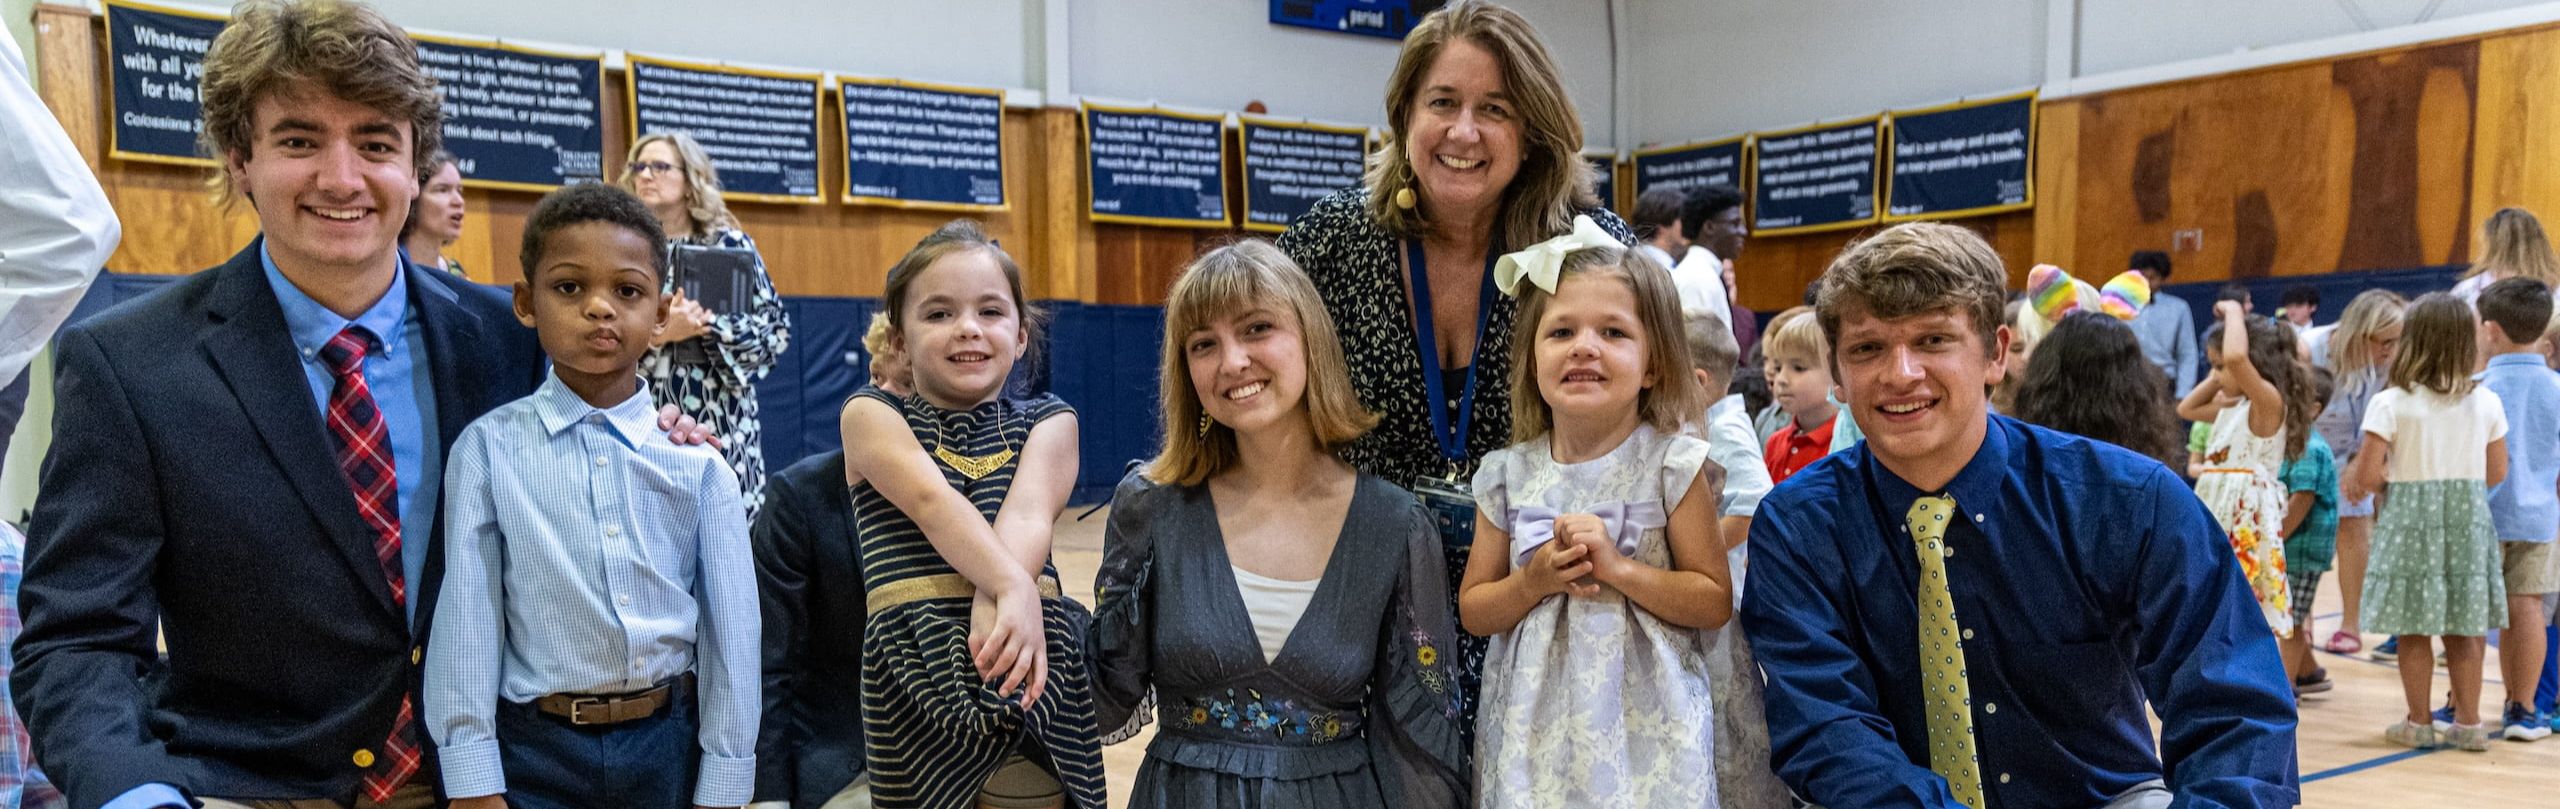 Three teachers with young students in a school gymnasium smiling at the camera